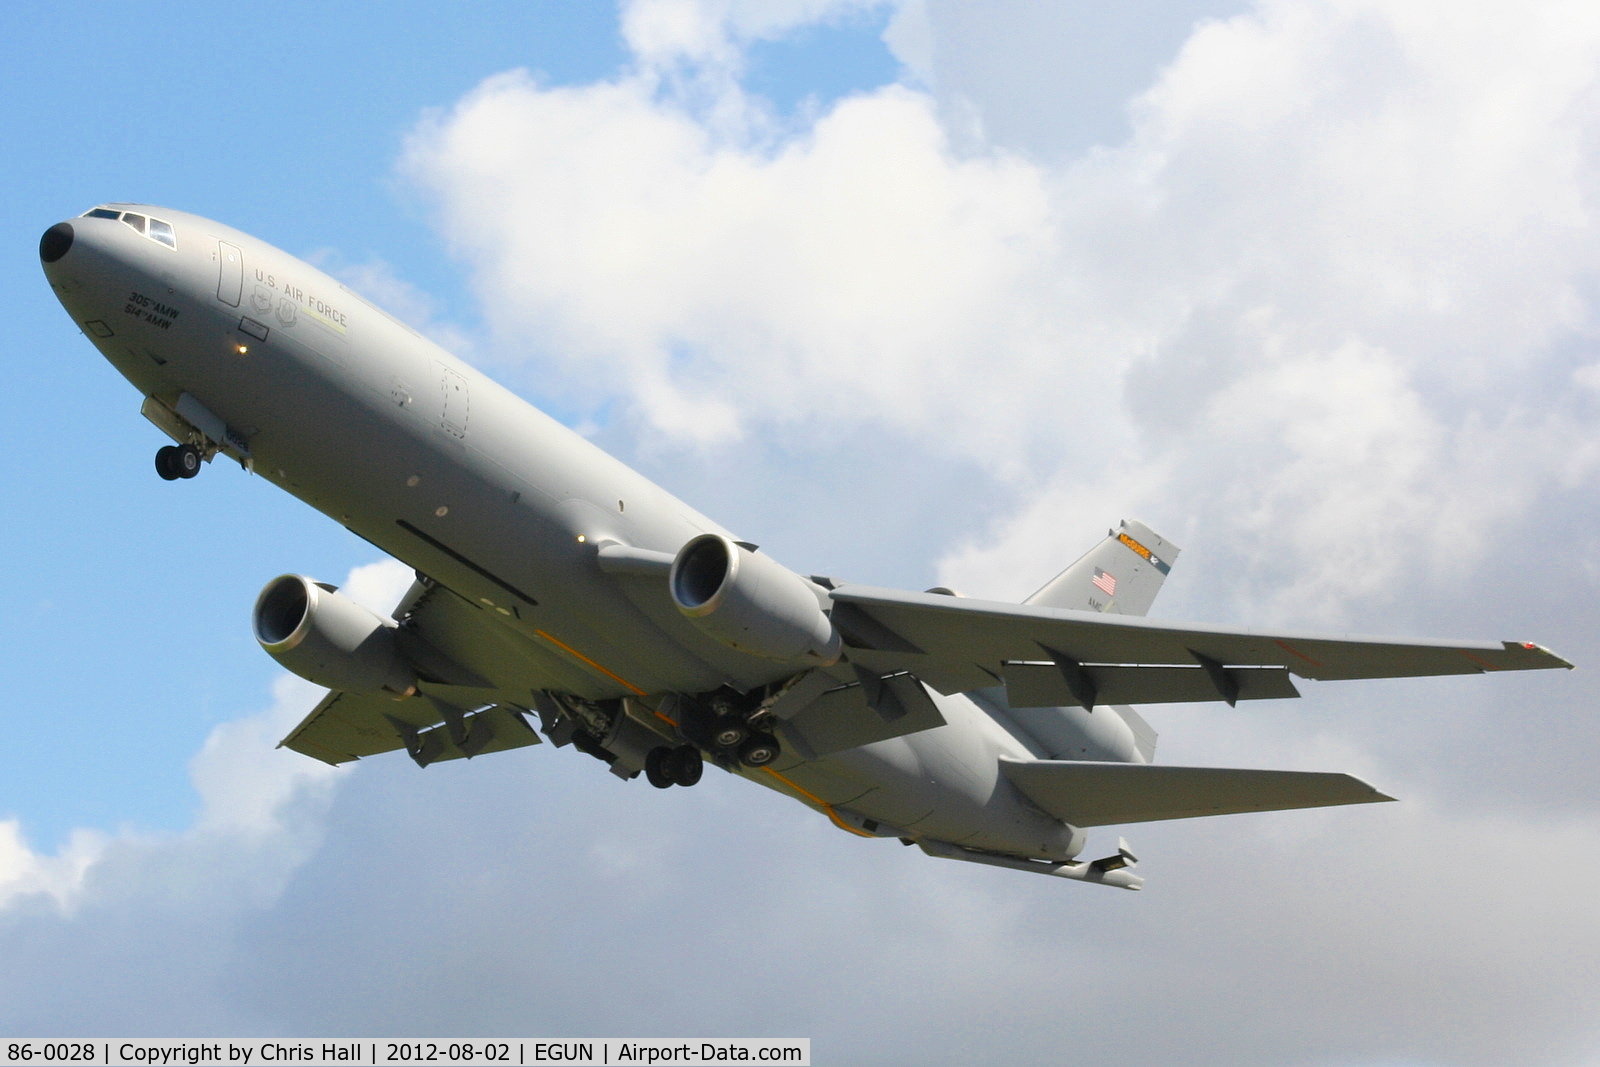 86-0028, 1986 McDonnell Douglas KC-10A Extender C/N 48241, 305th Air Mobility Wing based at McGuire AFB, New Jersey